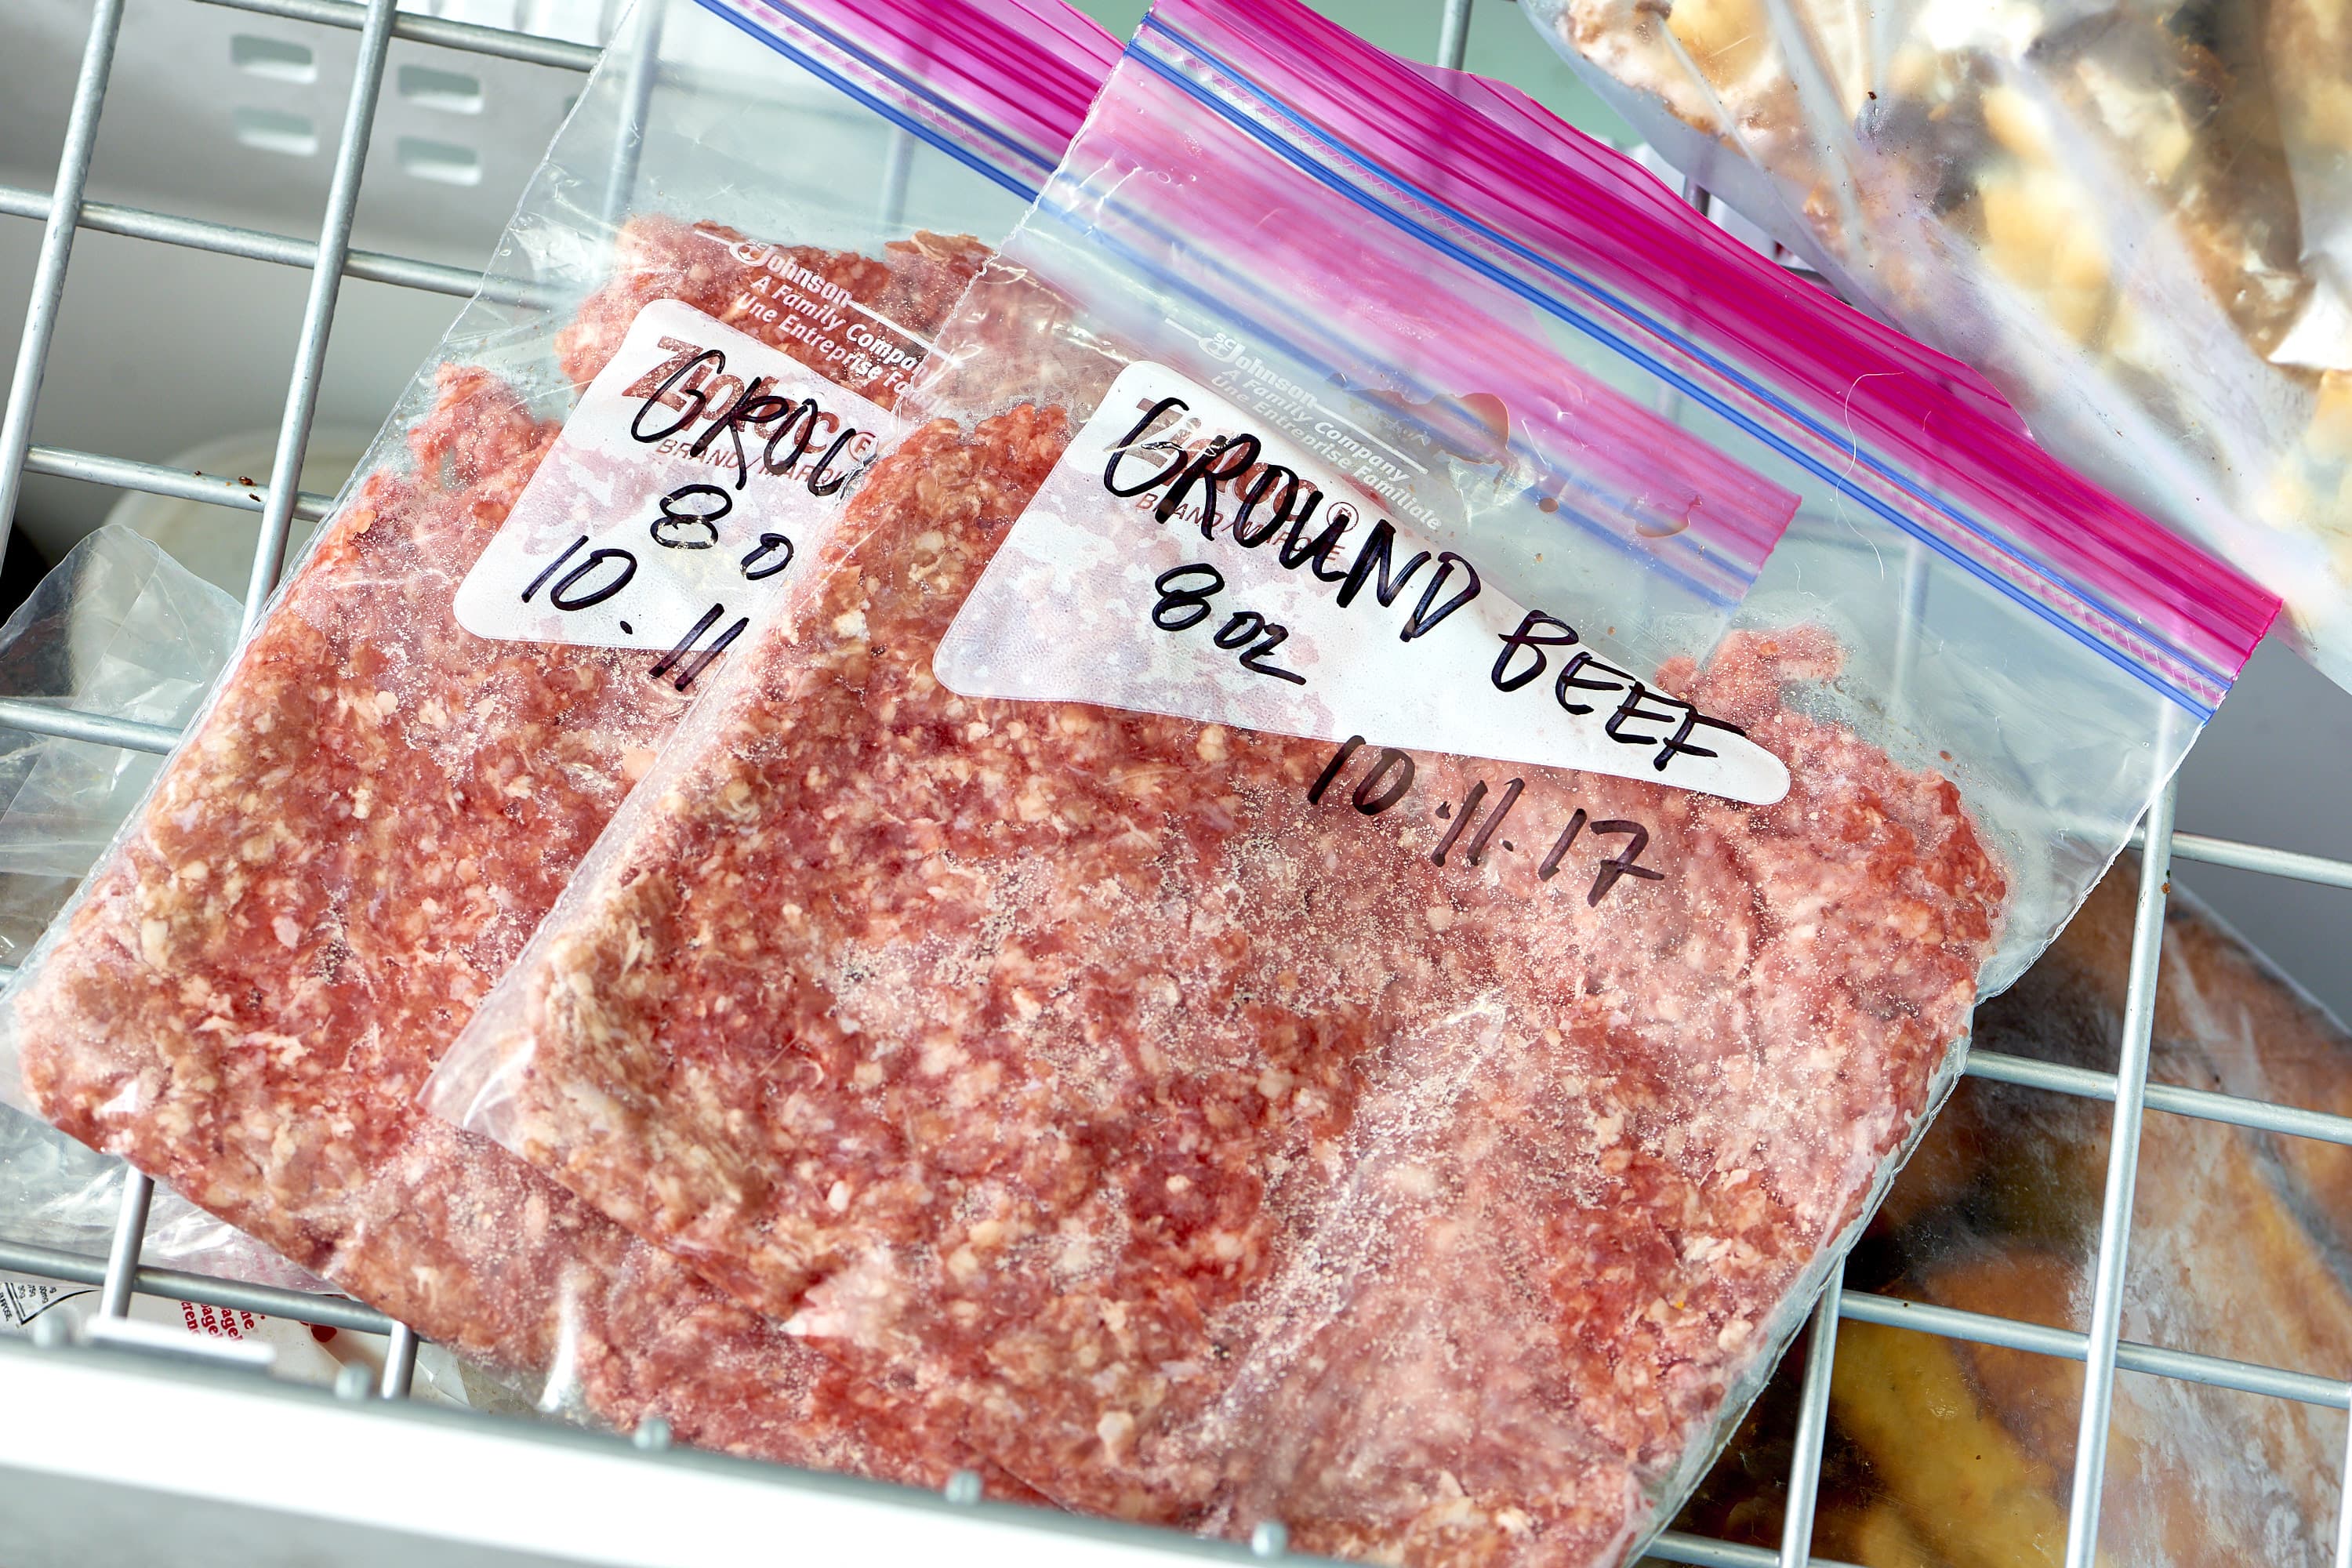 Can You Vacuum Seal Frozen Meat? Complete Guide to Store Meat